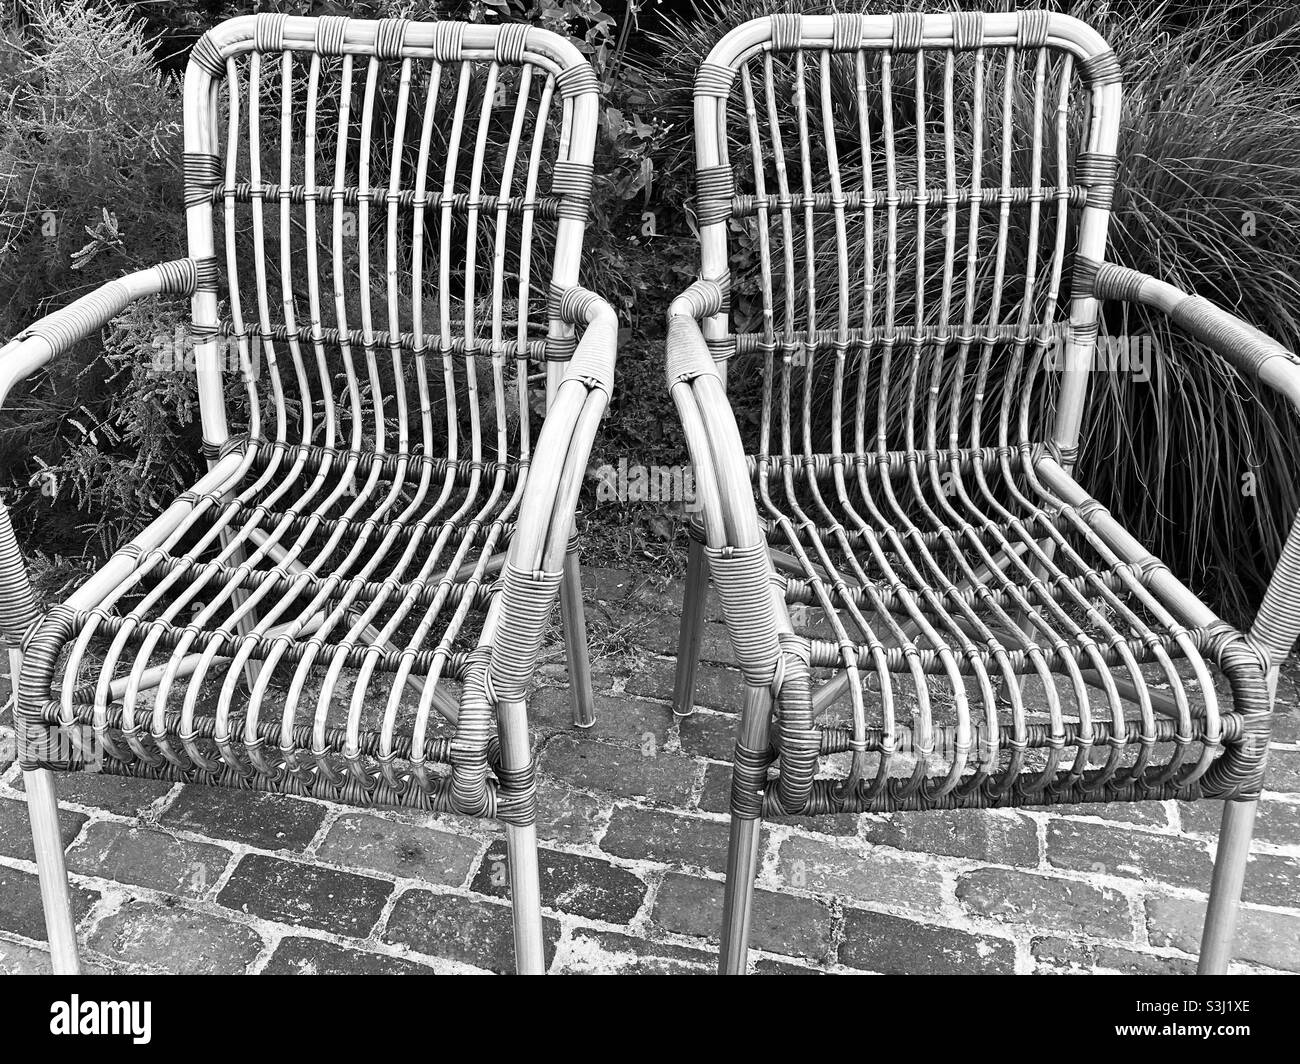 Two empty wicker chairs stand side by side in the garden Stock Photo